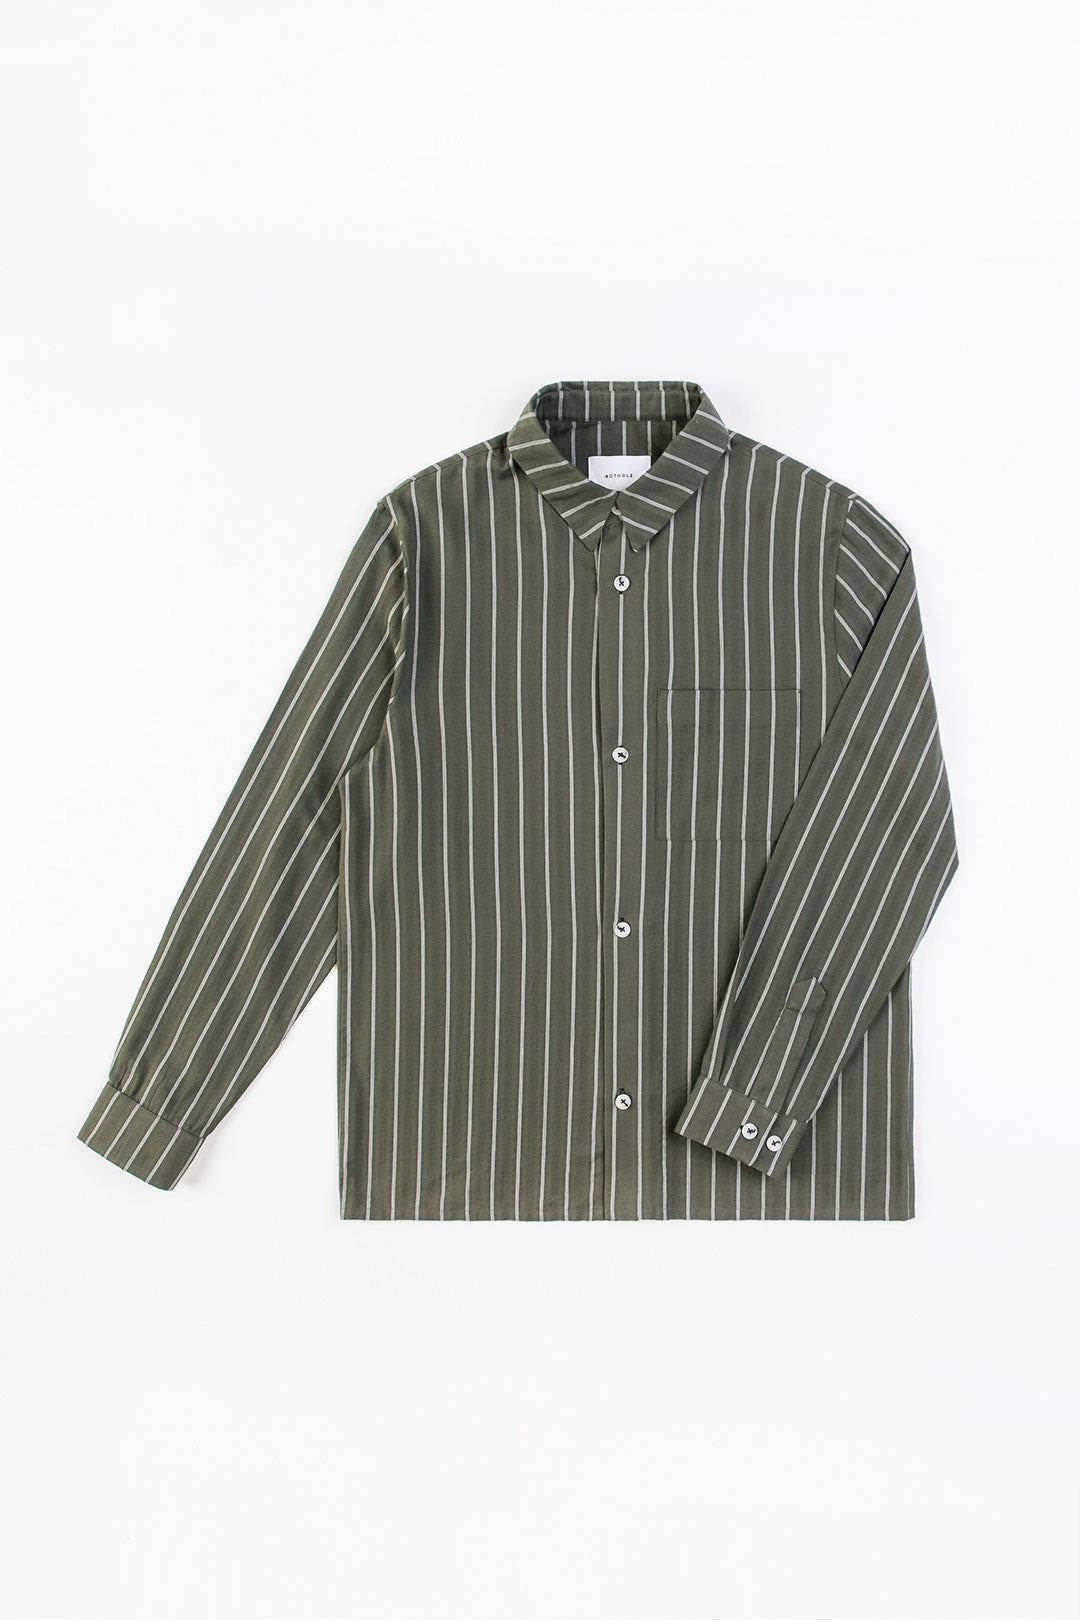 Dark green, striped shirt made from 100% organic cotton from Rotholz